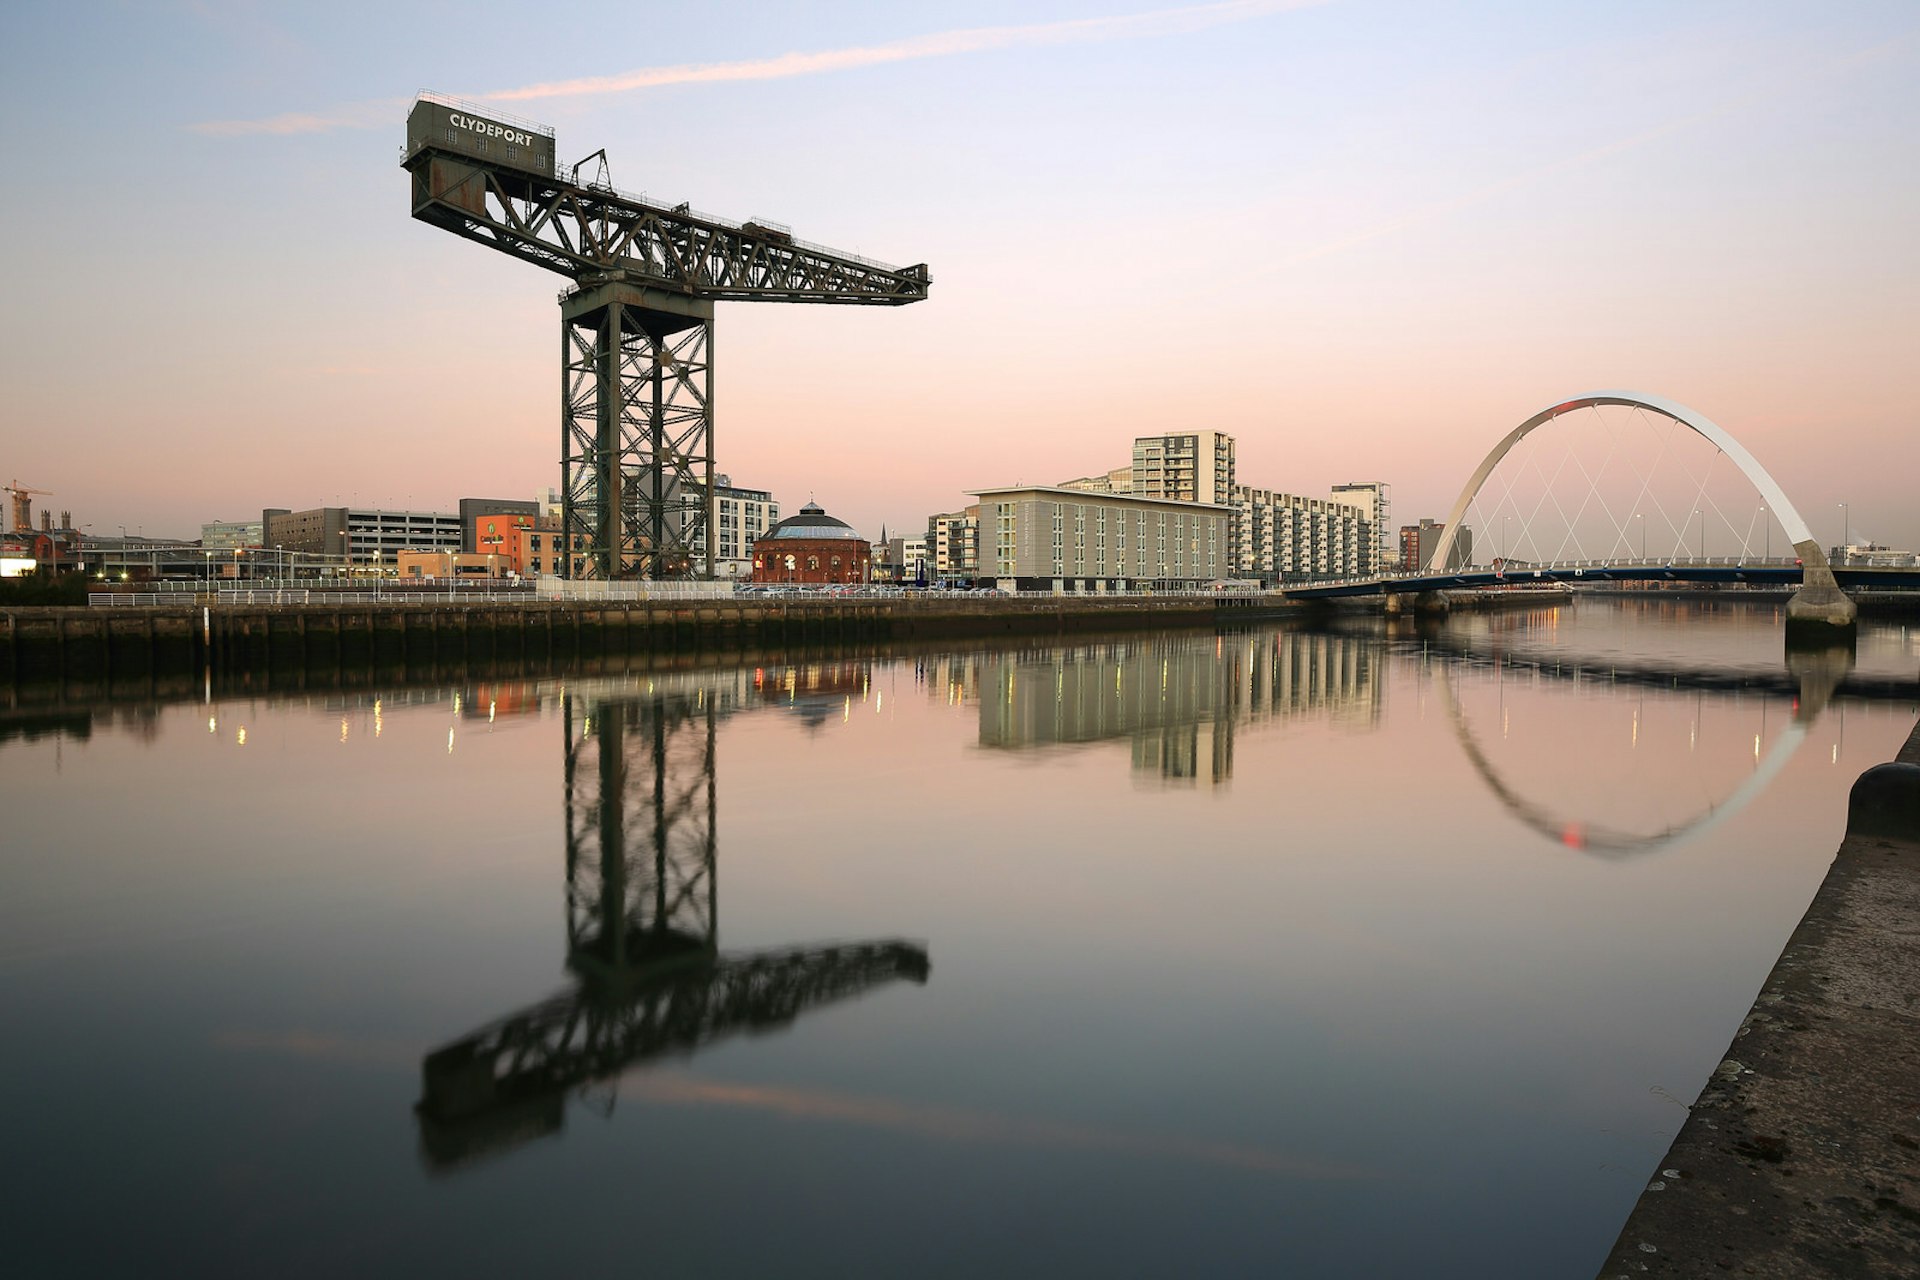 A trip along the Clyde is a trip through Glasgow's history, from industrial heritage to gleaming new developments © Targn Pleiades / Shutterstock